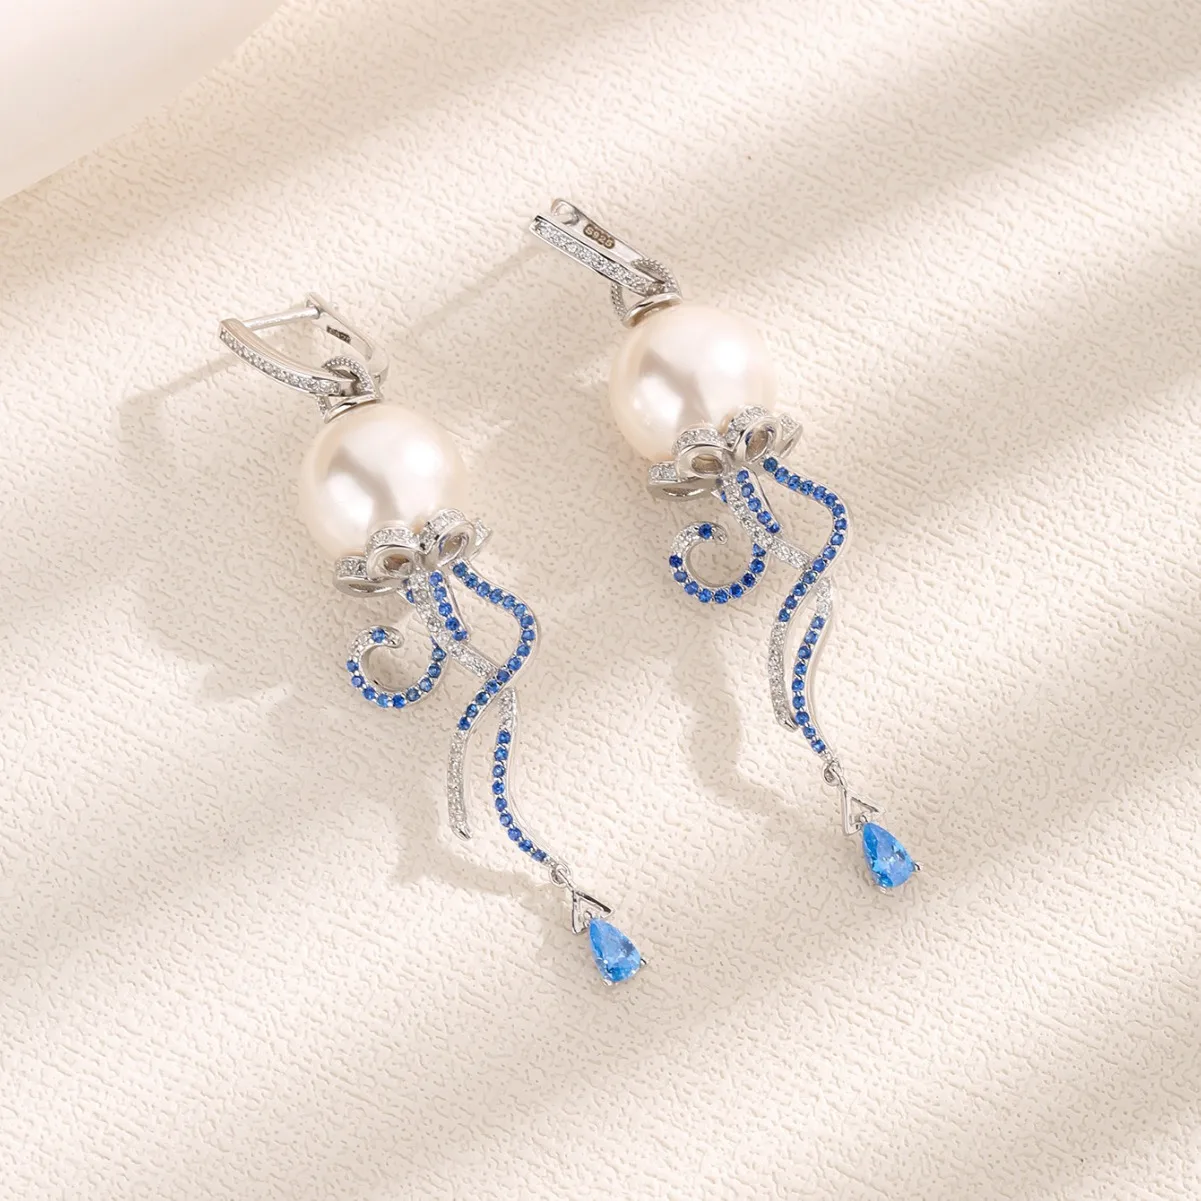 

The new s925 silver pearl jellyfish earrings from Europe and America are simple, fashionable, and versatile